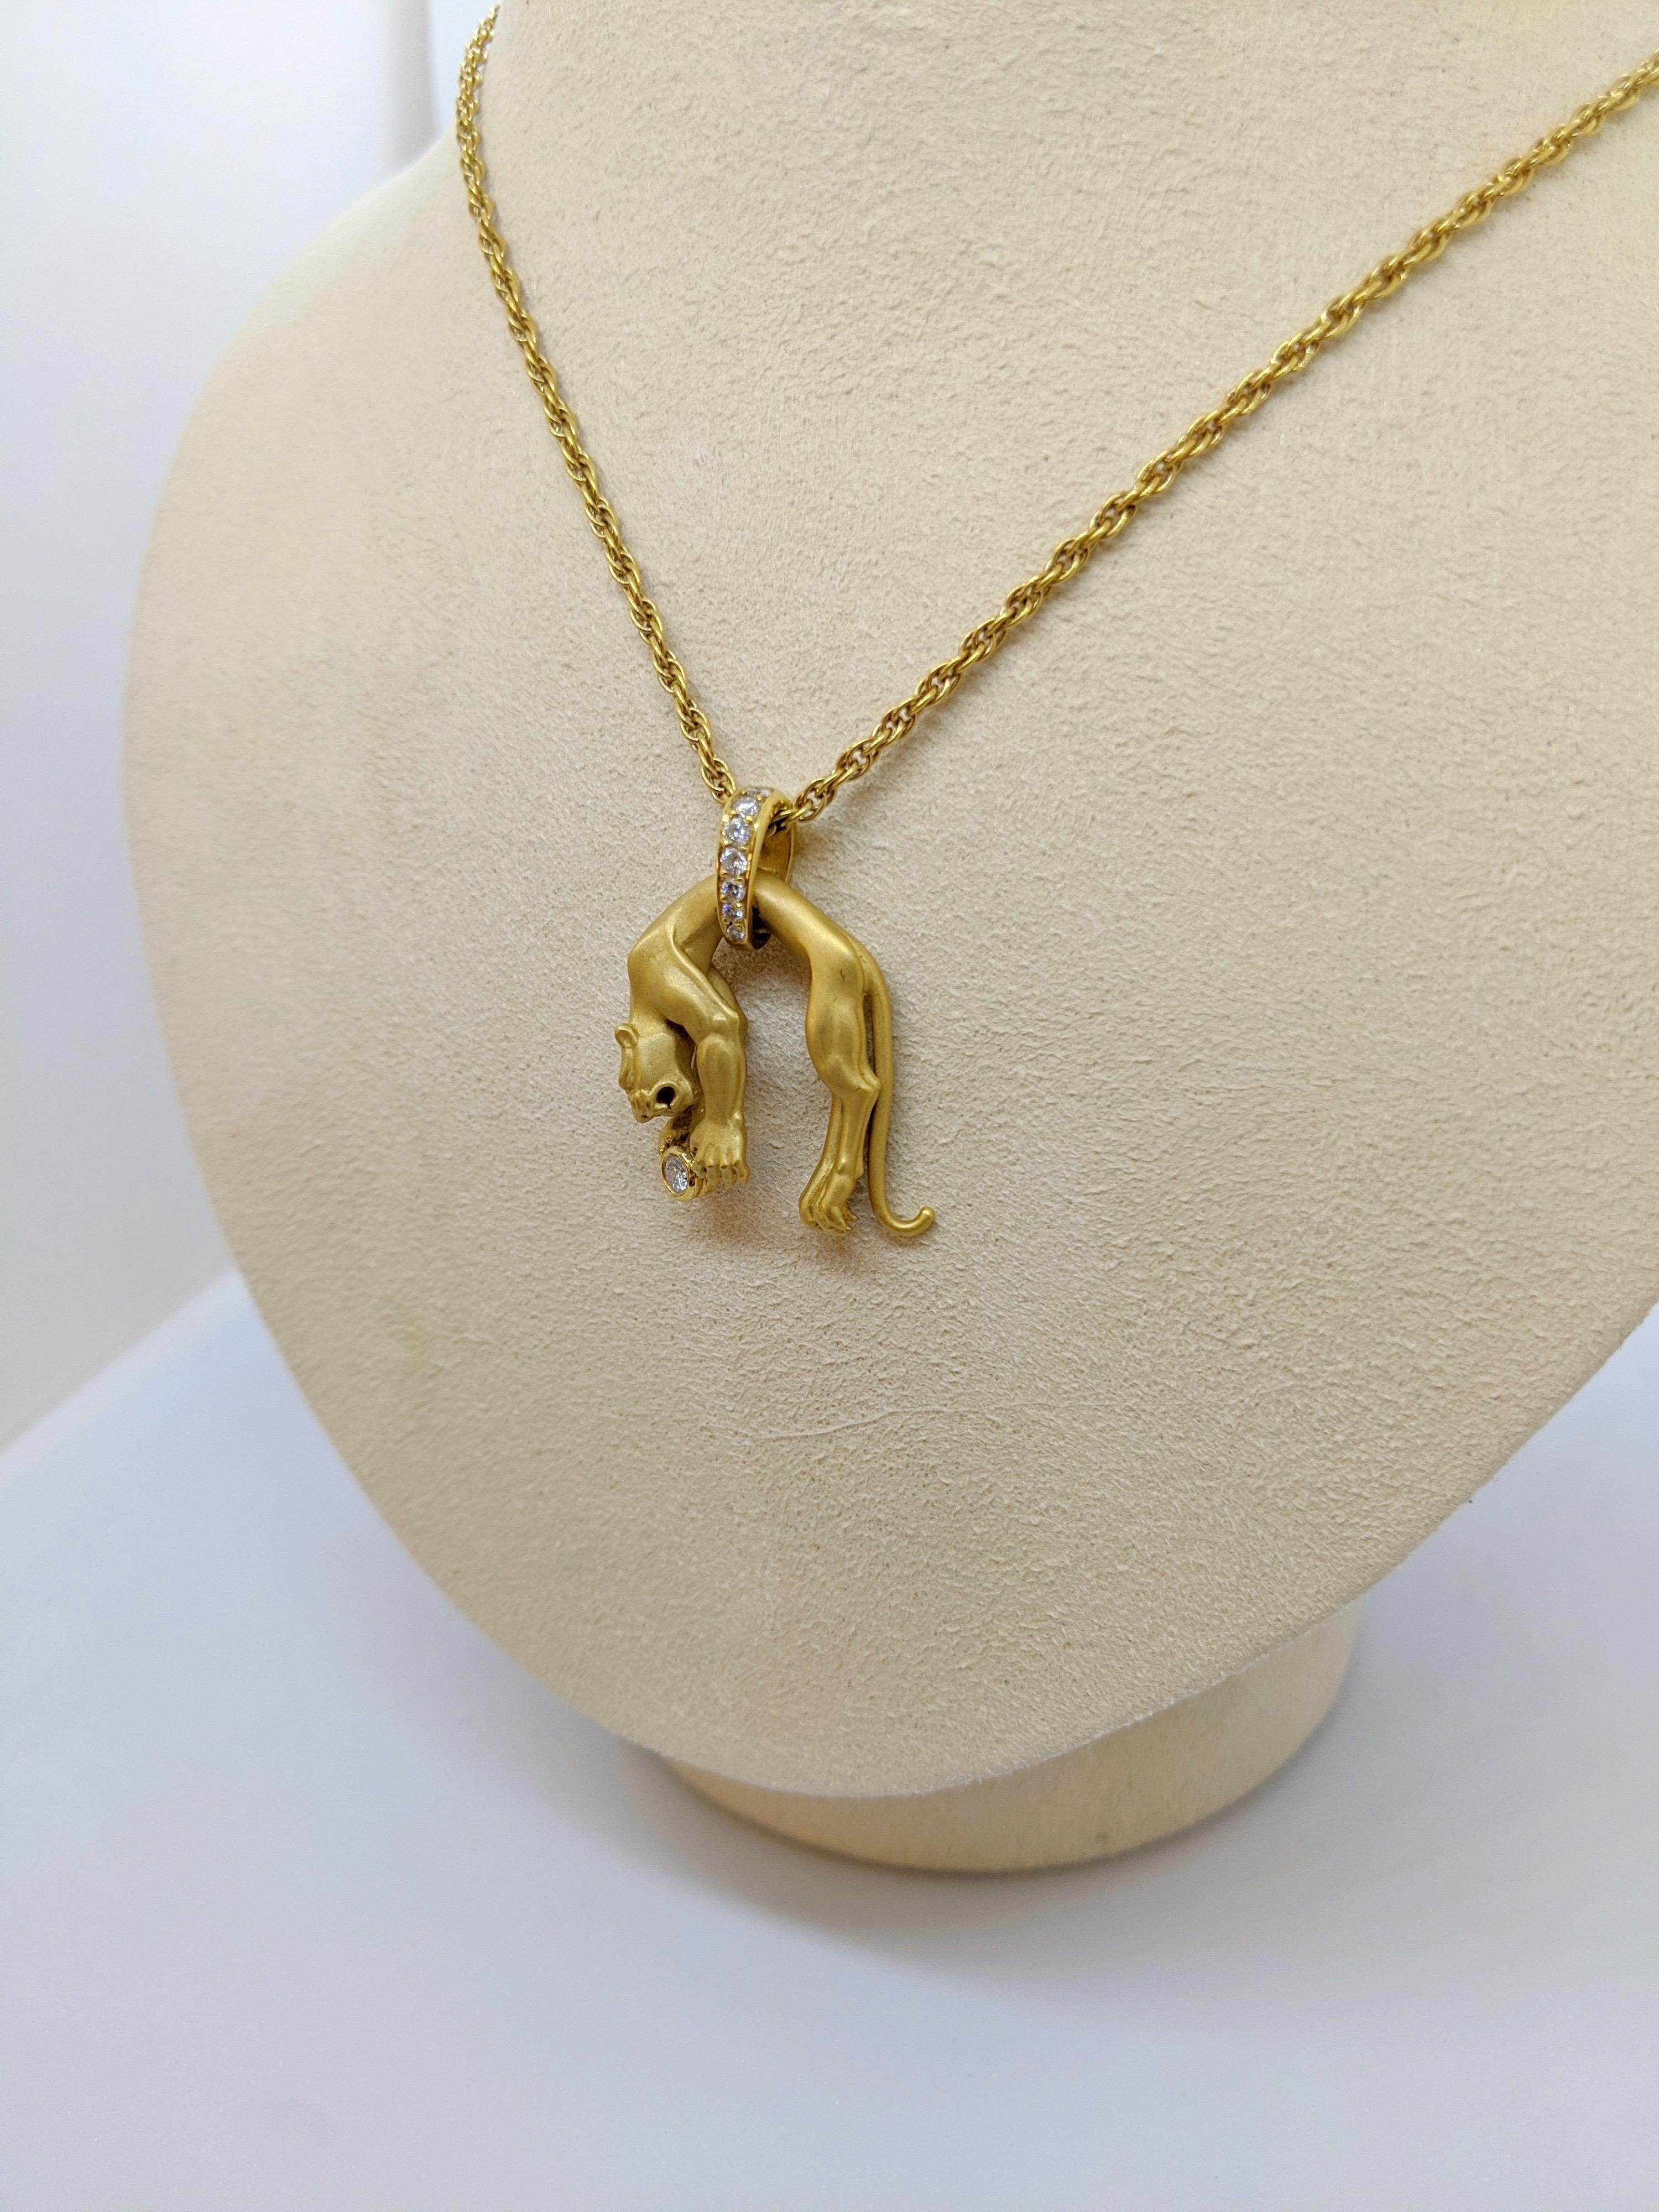 Expertly crafted in Spain by Carrera y Carrera, this elegant panther pendant lays beautifully on ones neck. Accented with diamonds, the highly detailed satin finished panther is holding a bezel set diamond and is hanging on an 18'' gold link chain.